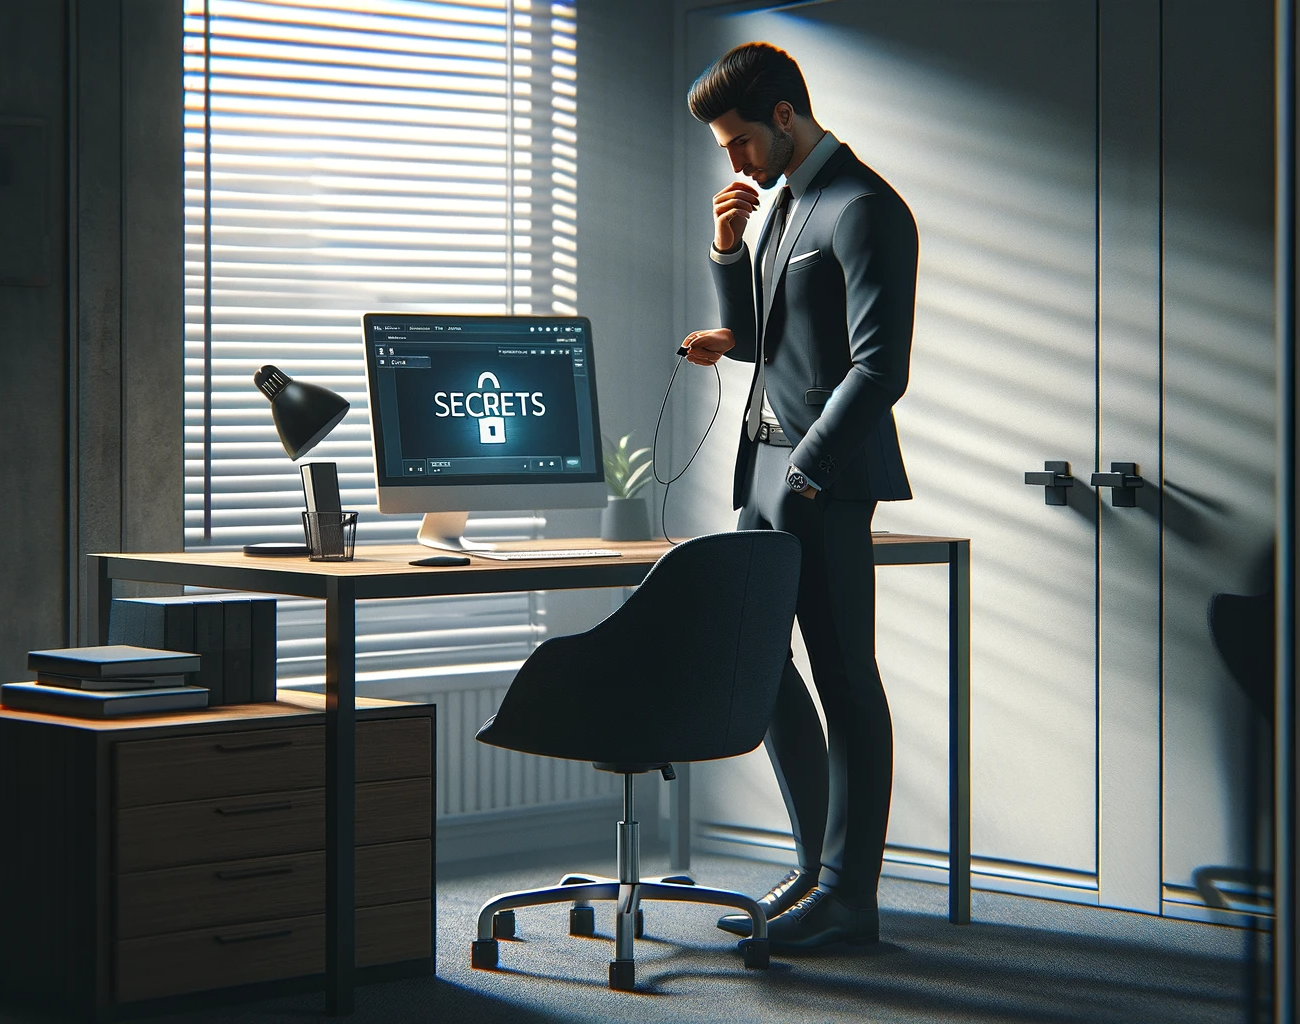 An employee in an office next to a computer. the screen says 'secrets' and suggests the man is downloading restricted company information. Private Investigator